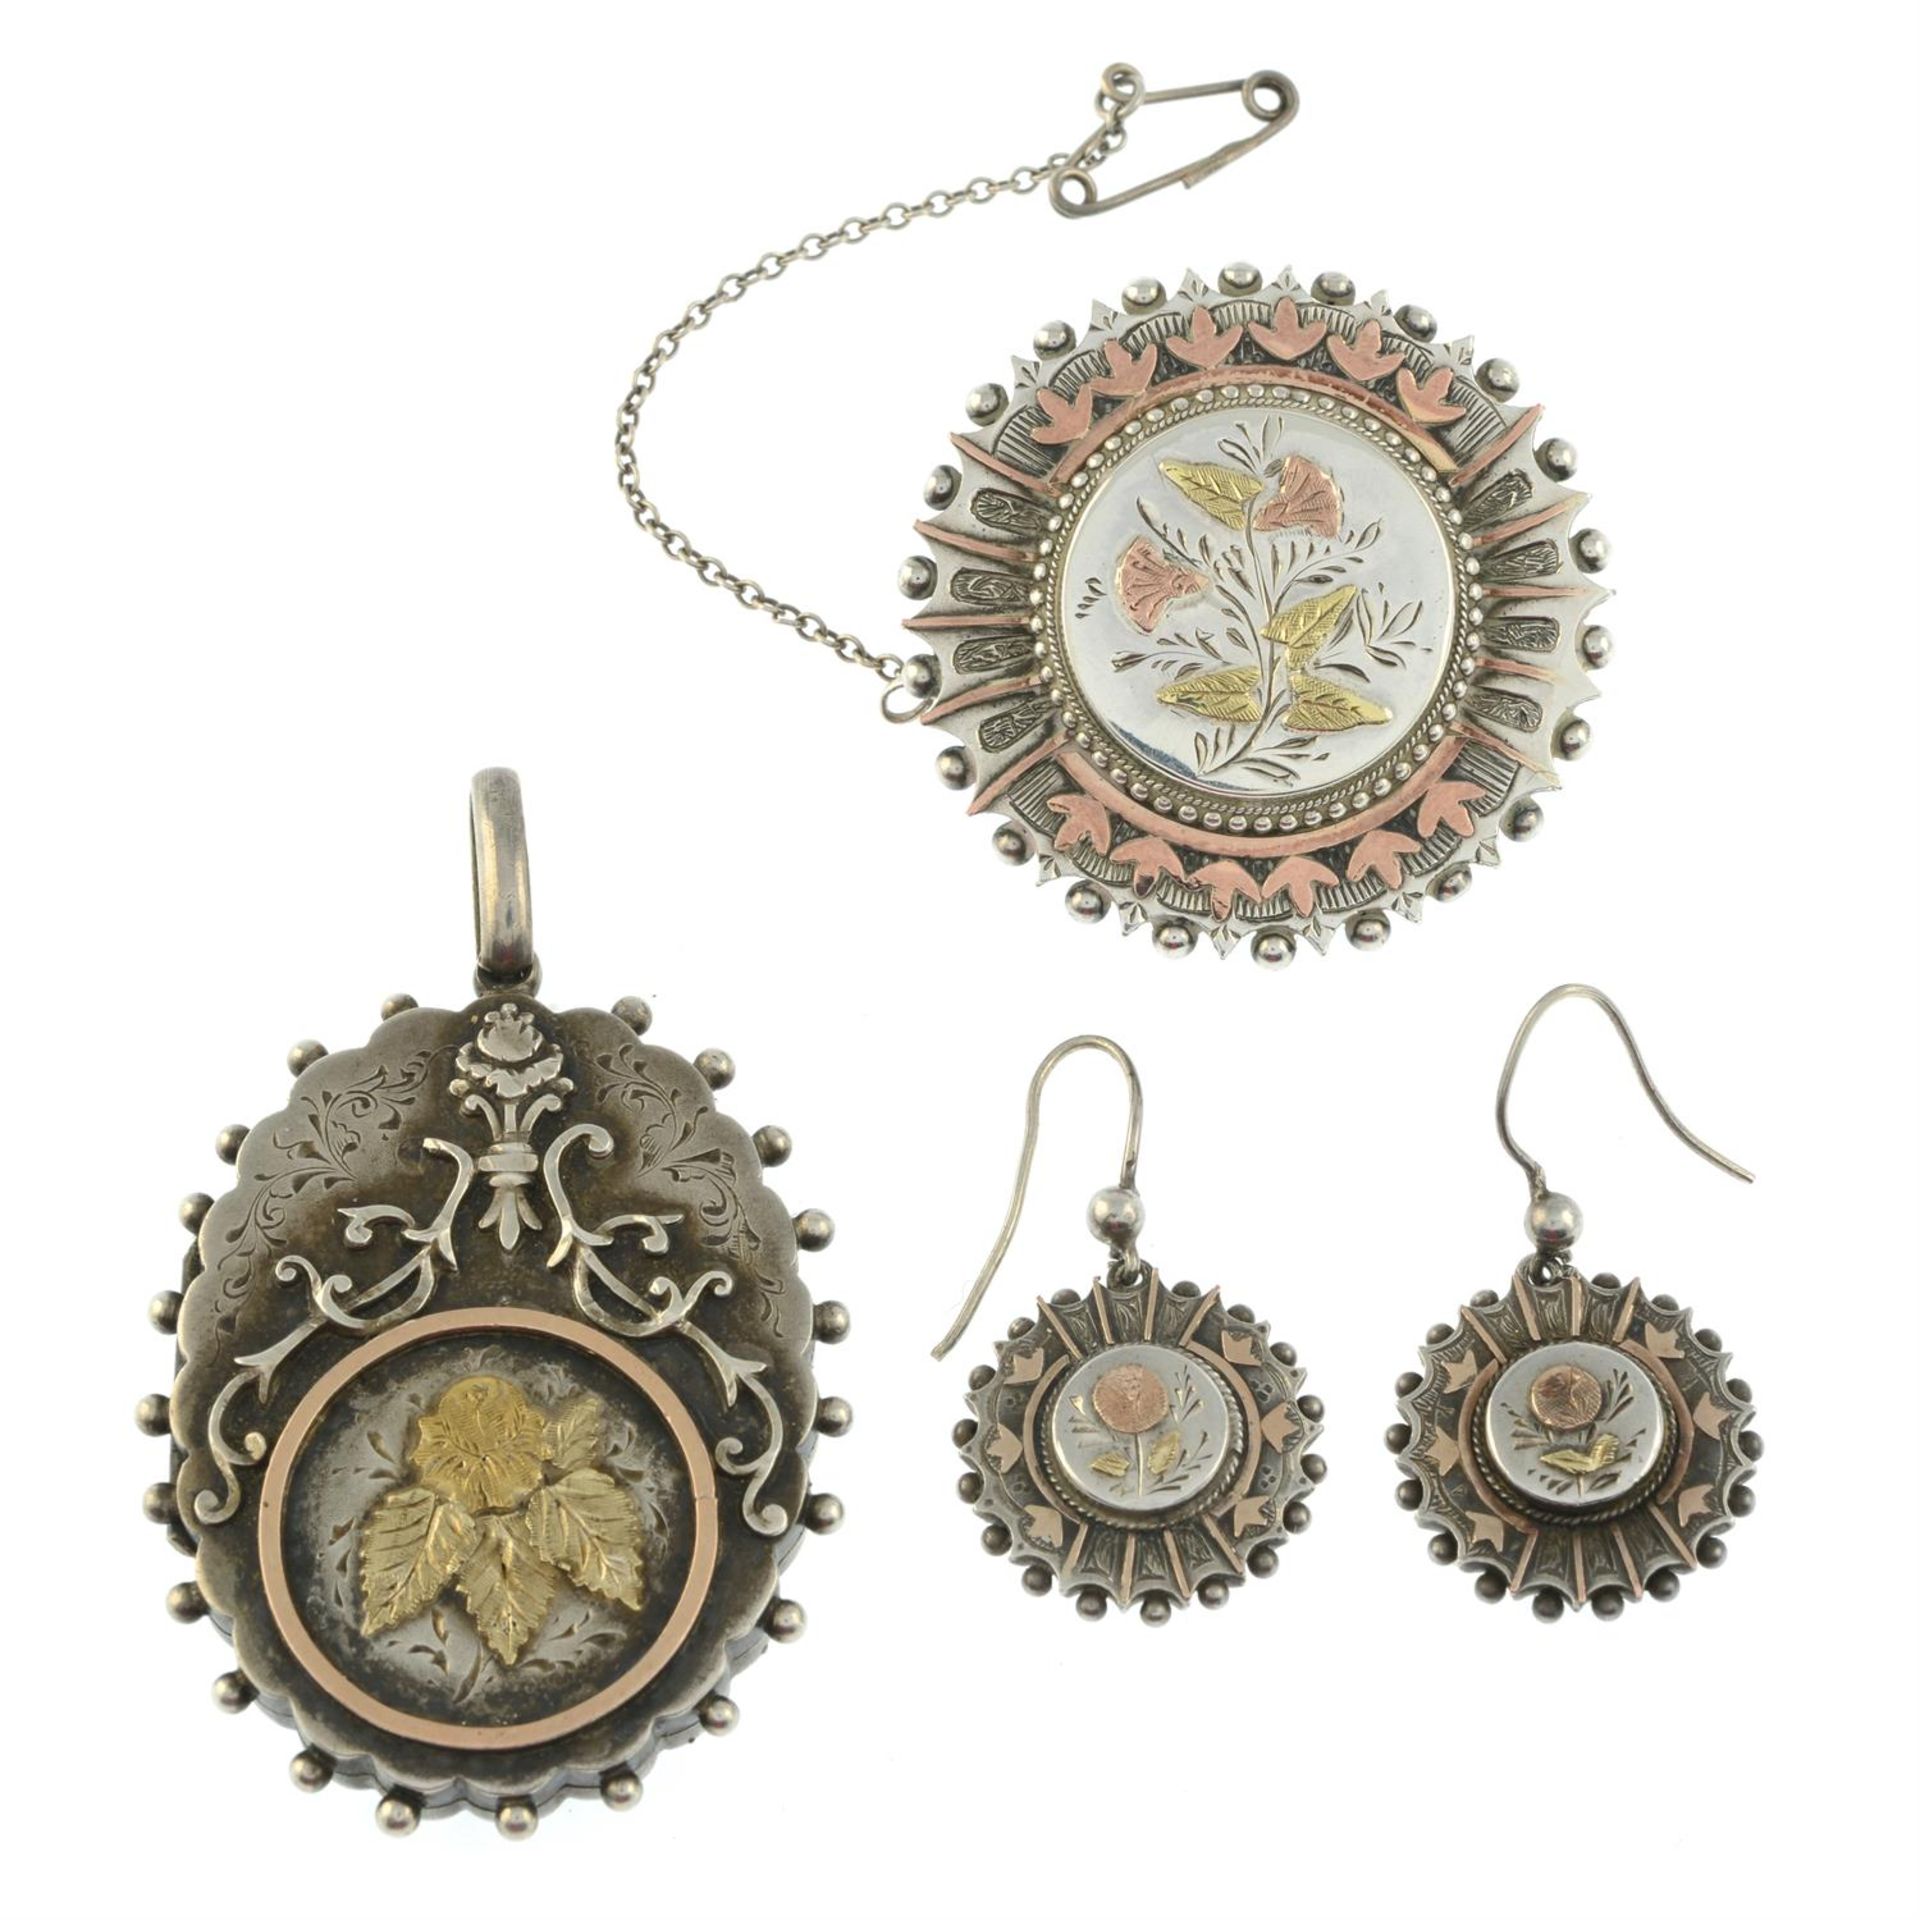 Three items of Victorian tri-colour jewellery, comprising a brooch, a pendant and a pair of